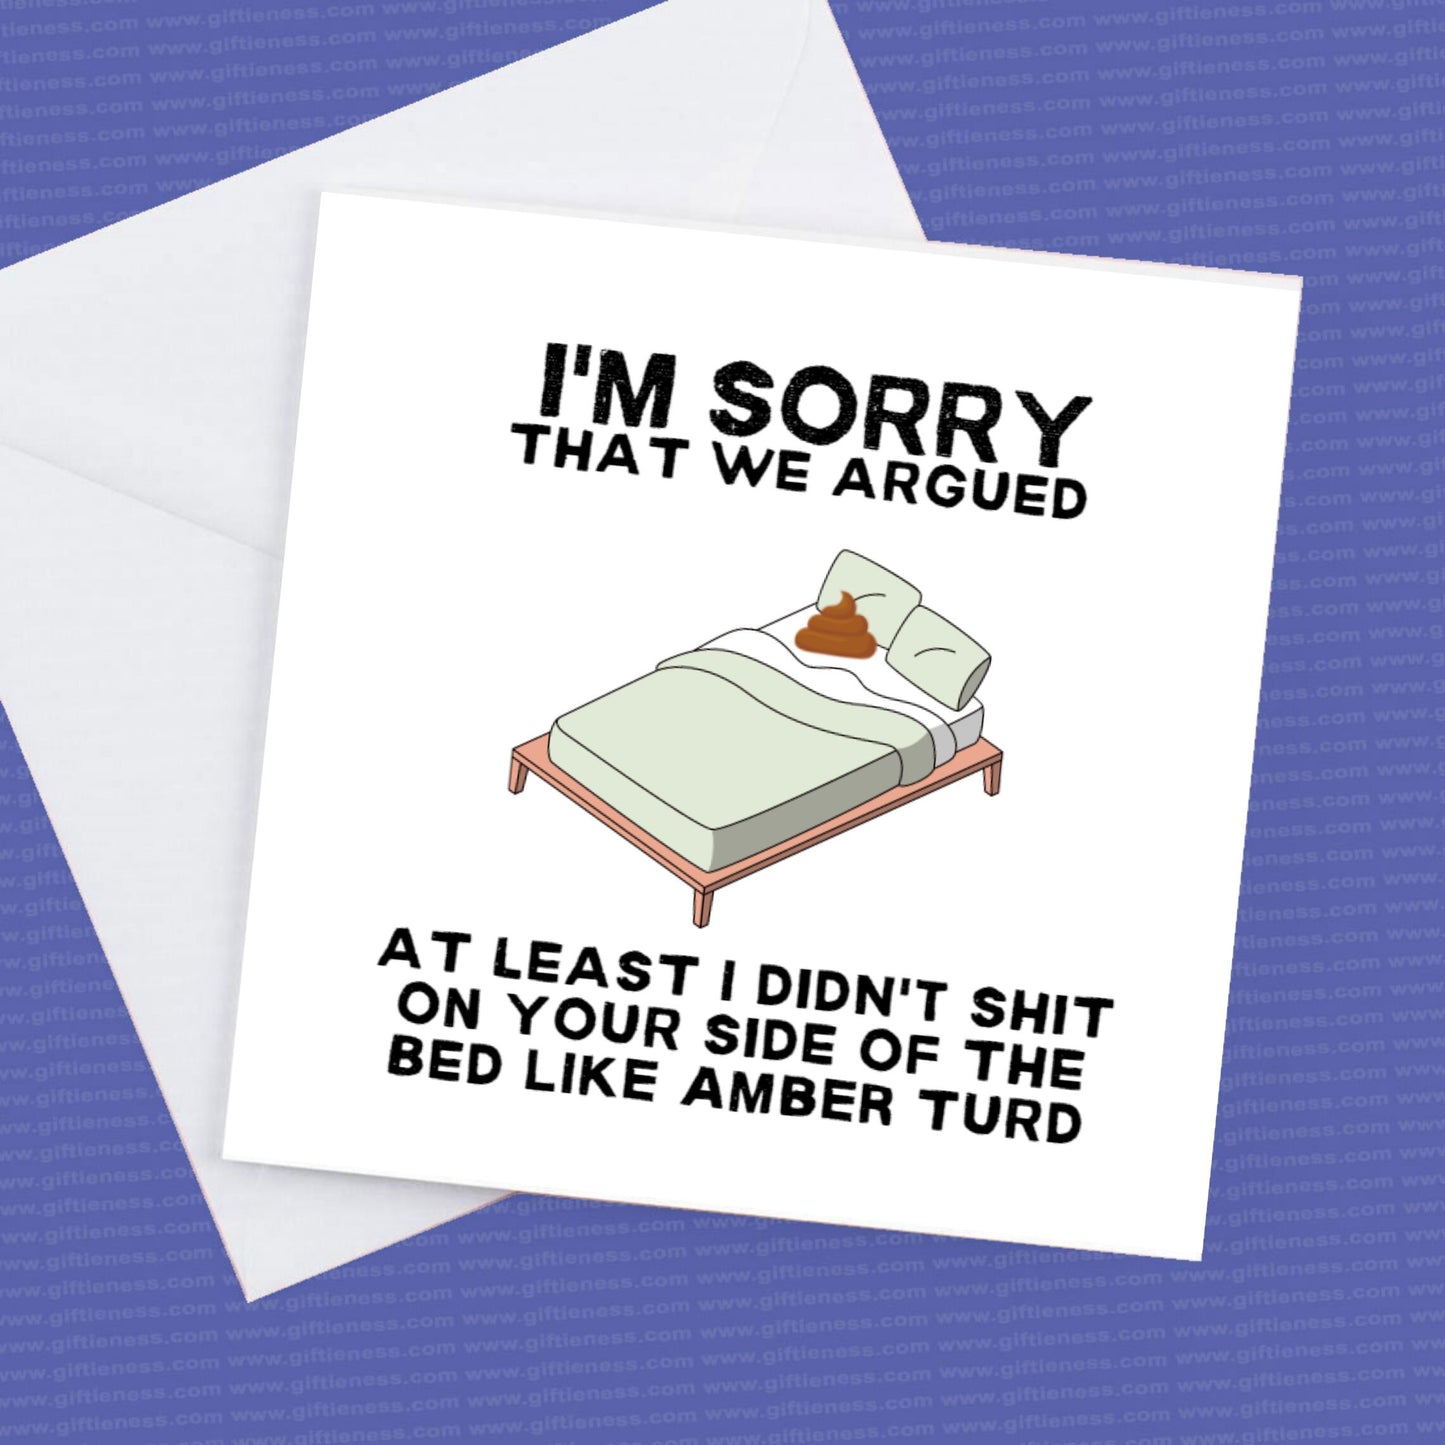 Apology Card Johnny Depp Card, At Least She Didn't Shit In Your Bed Johnny Depp Break Up Card, Johnny Depp Fun Card